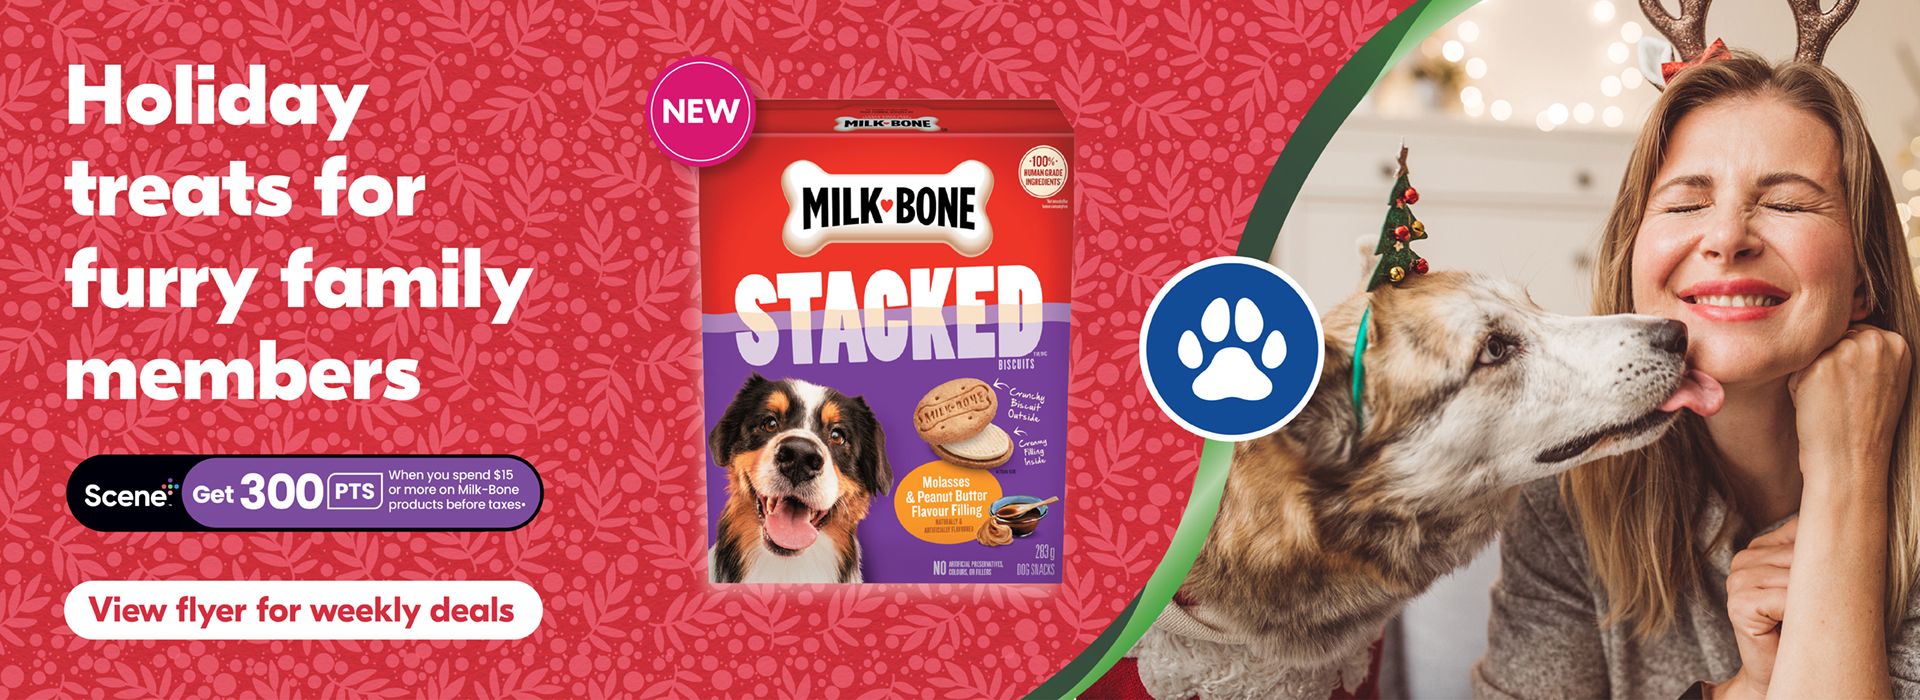 Text Reading 'Holiday treats for furry family members. With Scene+, get 300 points, when you spend $15 or more on Milk-bone products before taxes. To 'View flyer for weekly deals', click on the button given below.'